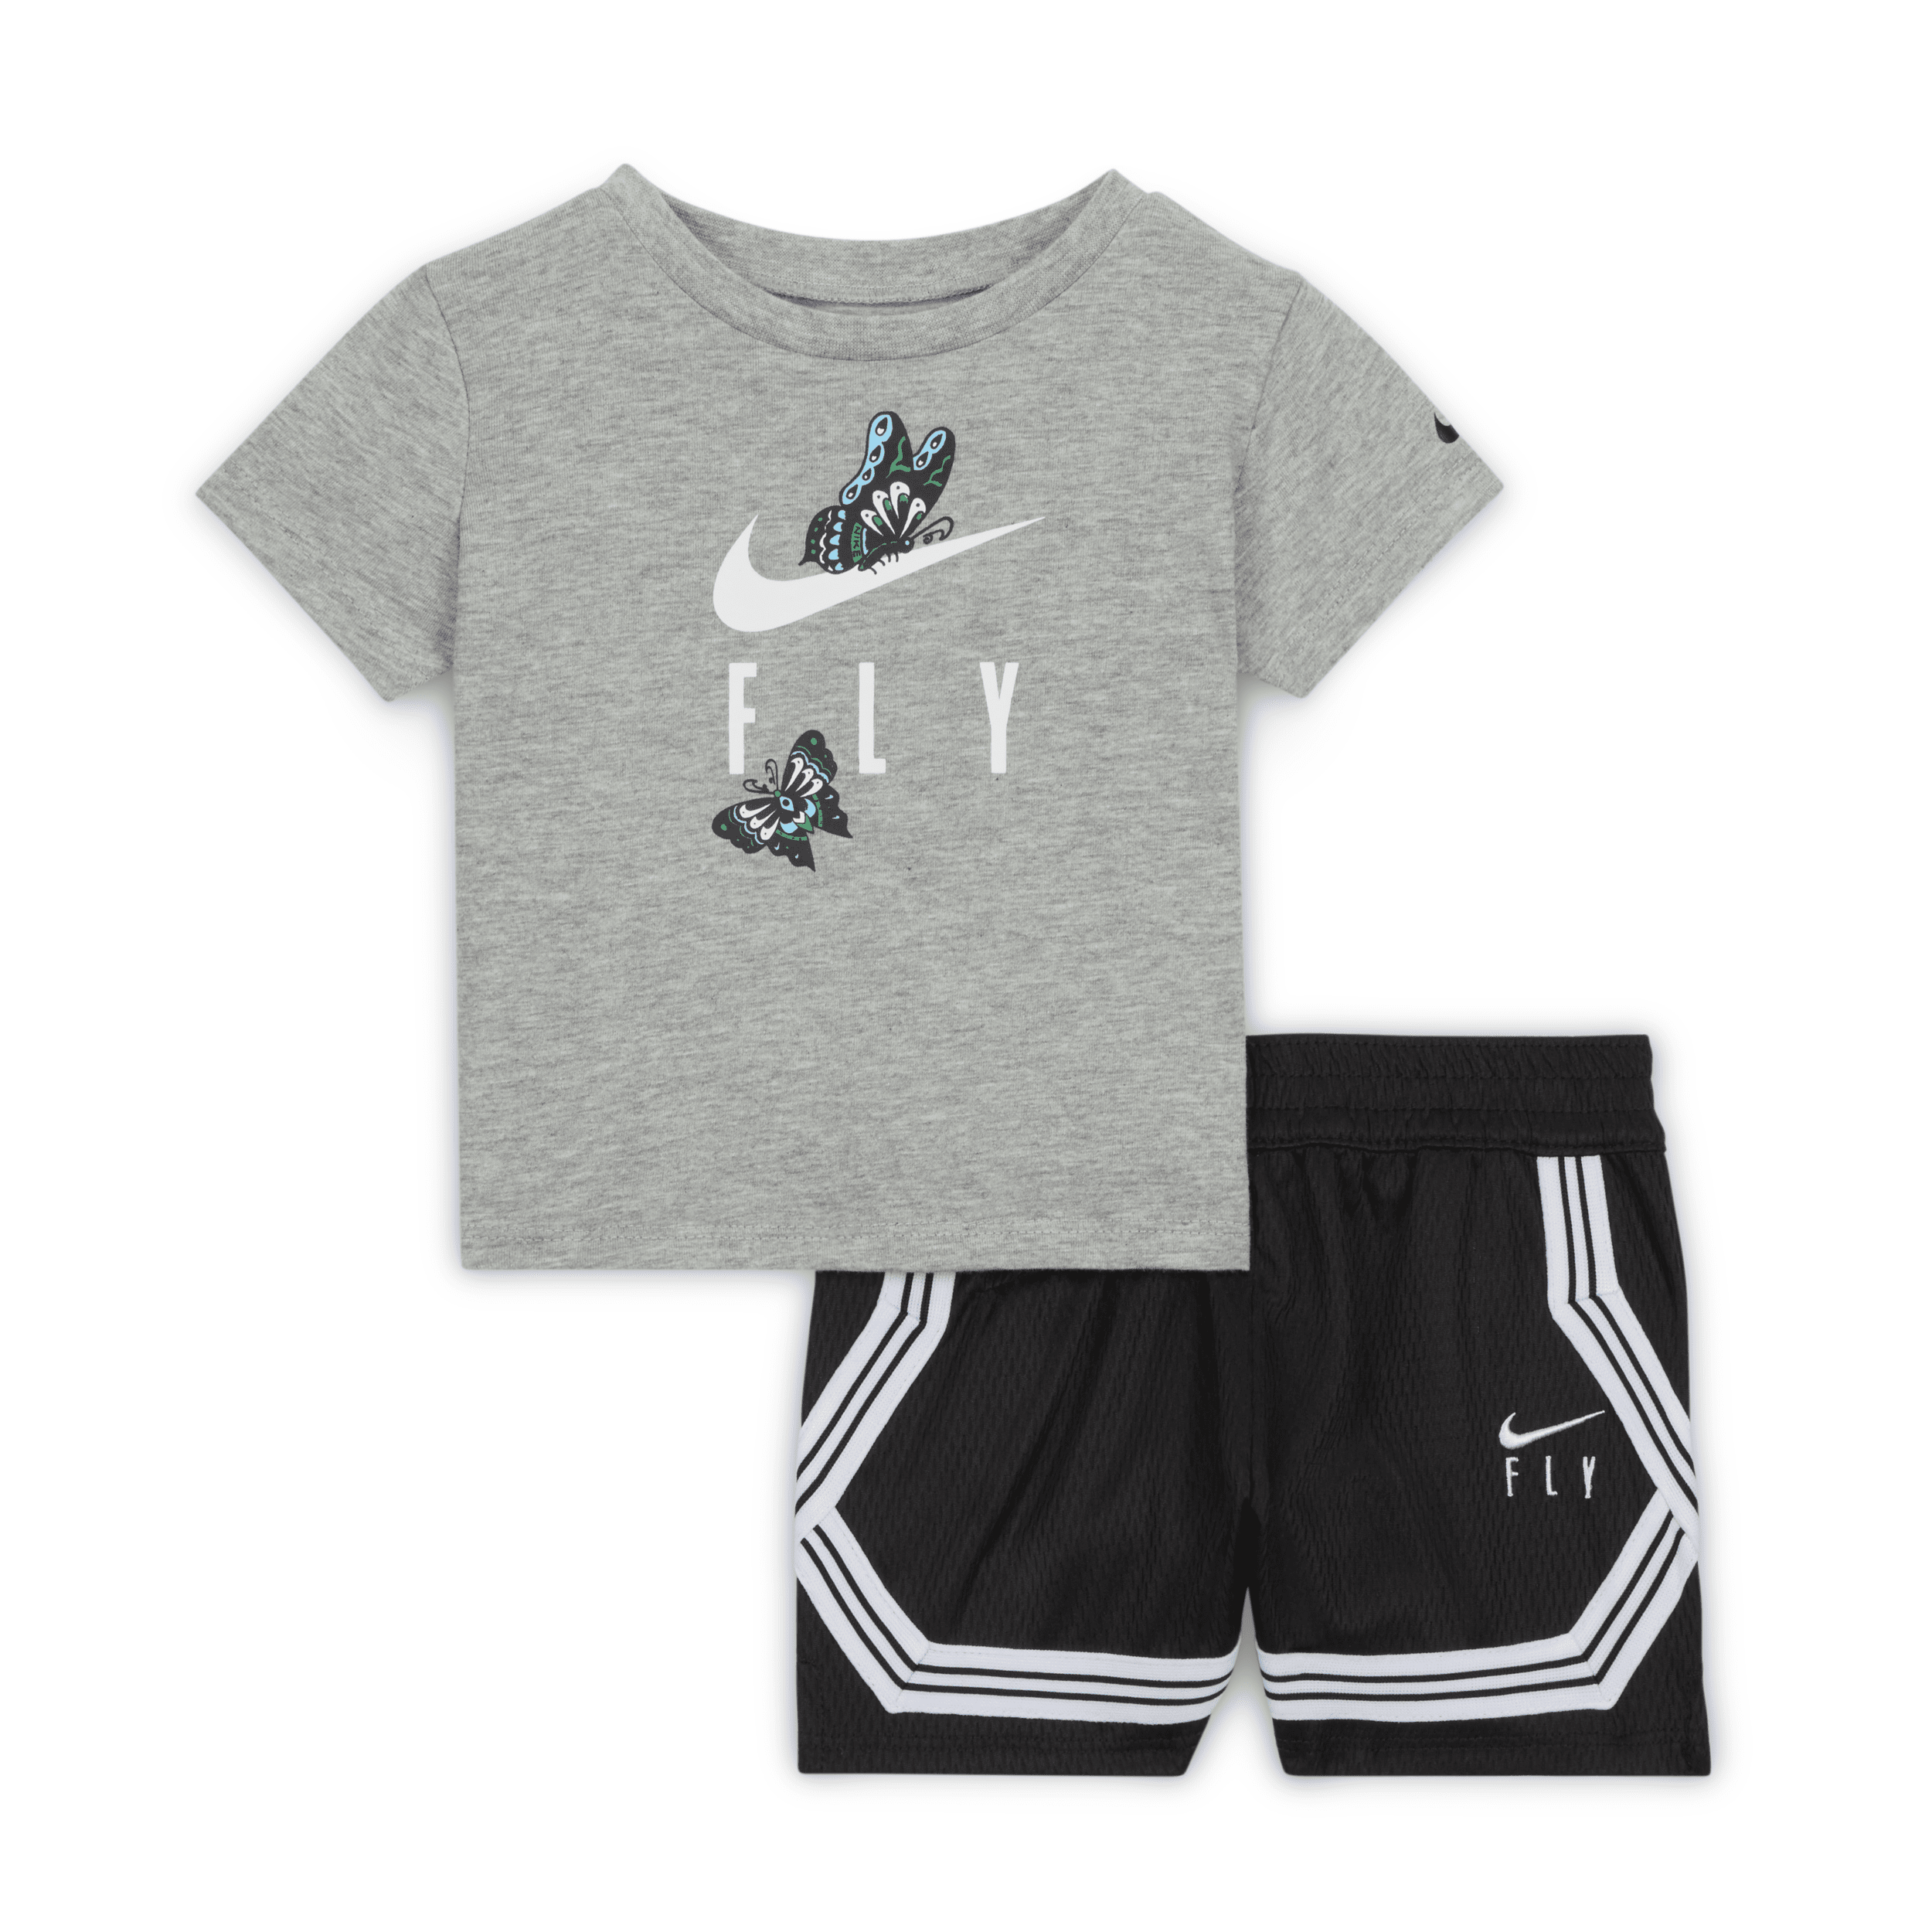 Nike Dry-fit Fly Crossover Baby (12-24m) 2-piece T-shirt Set In Black